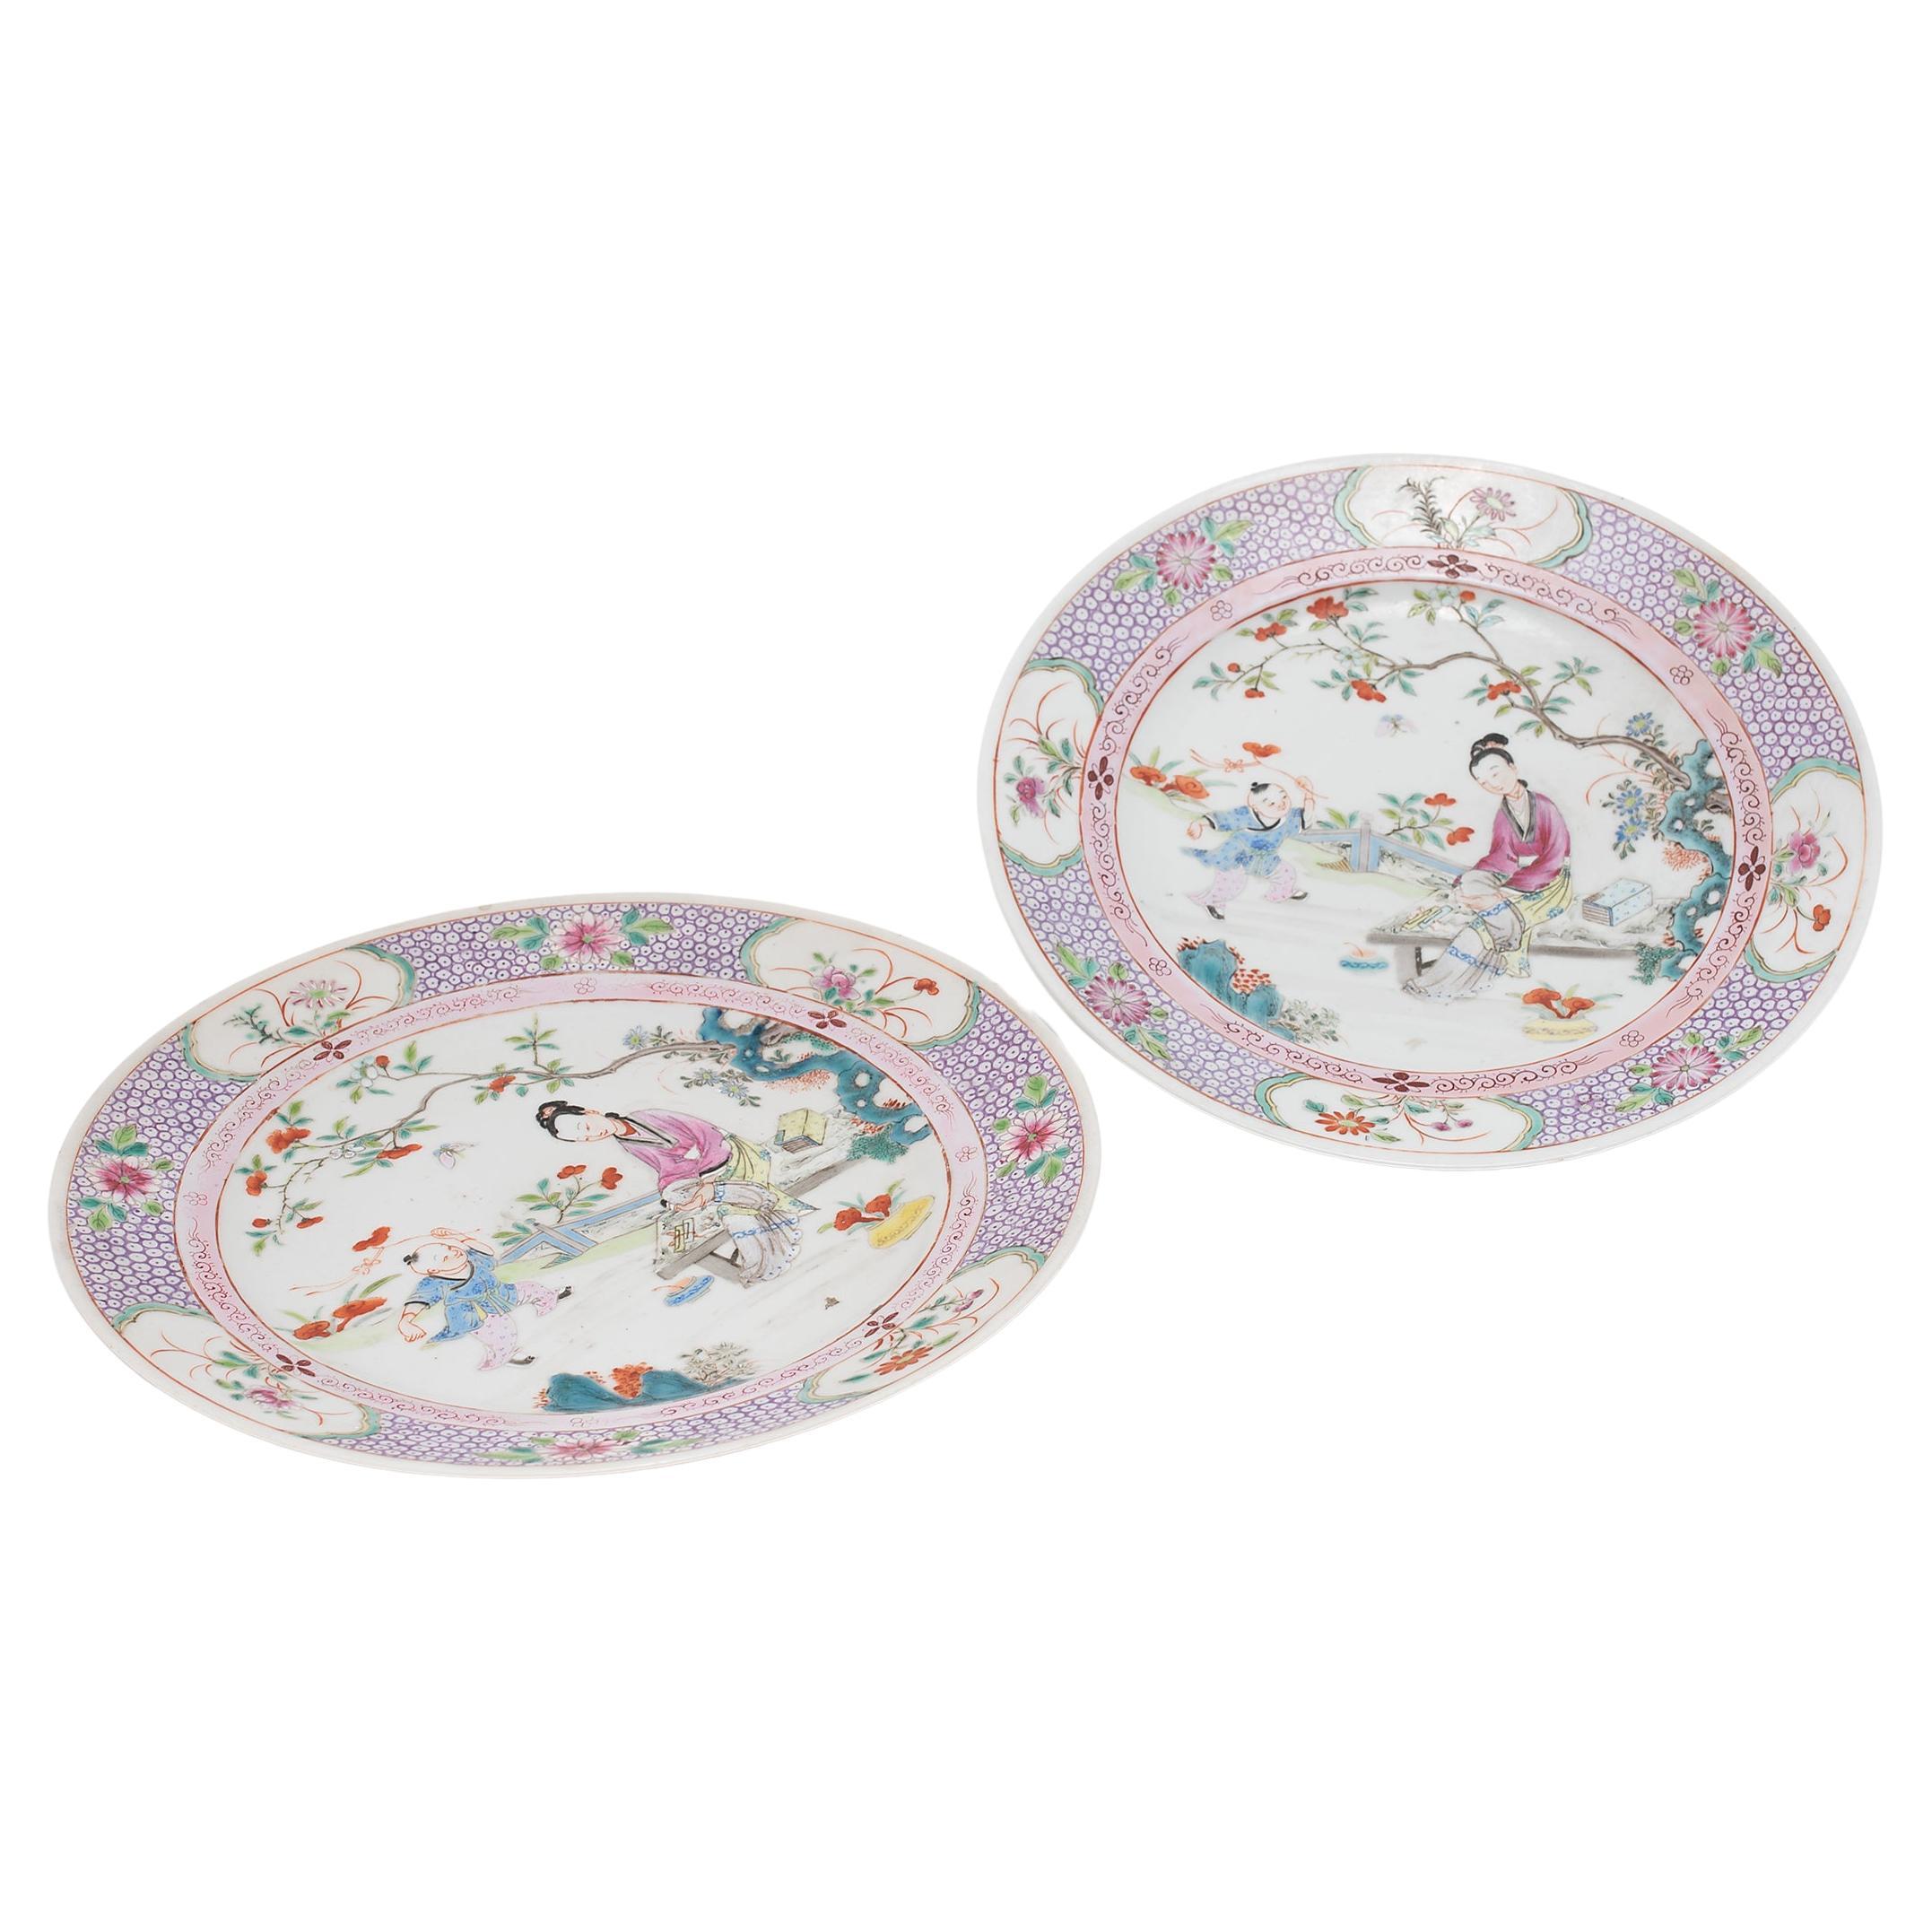 Pair of Chinese Famille Rose Plates with Garden Scenes, C. 1900 For Sale